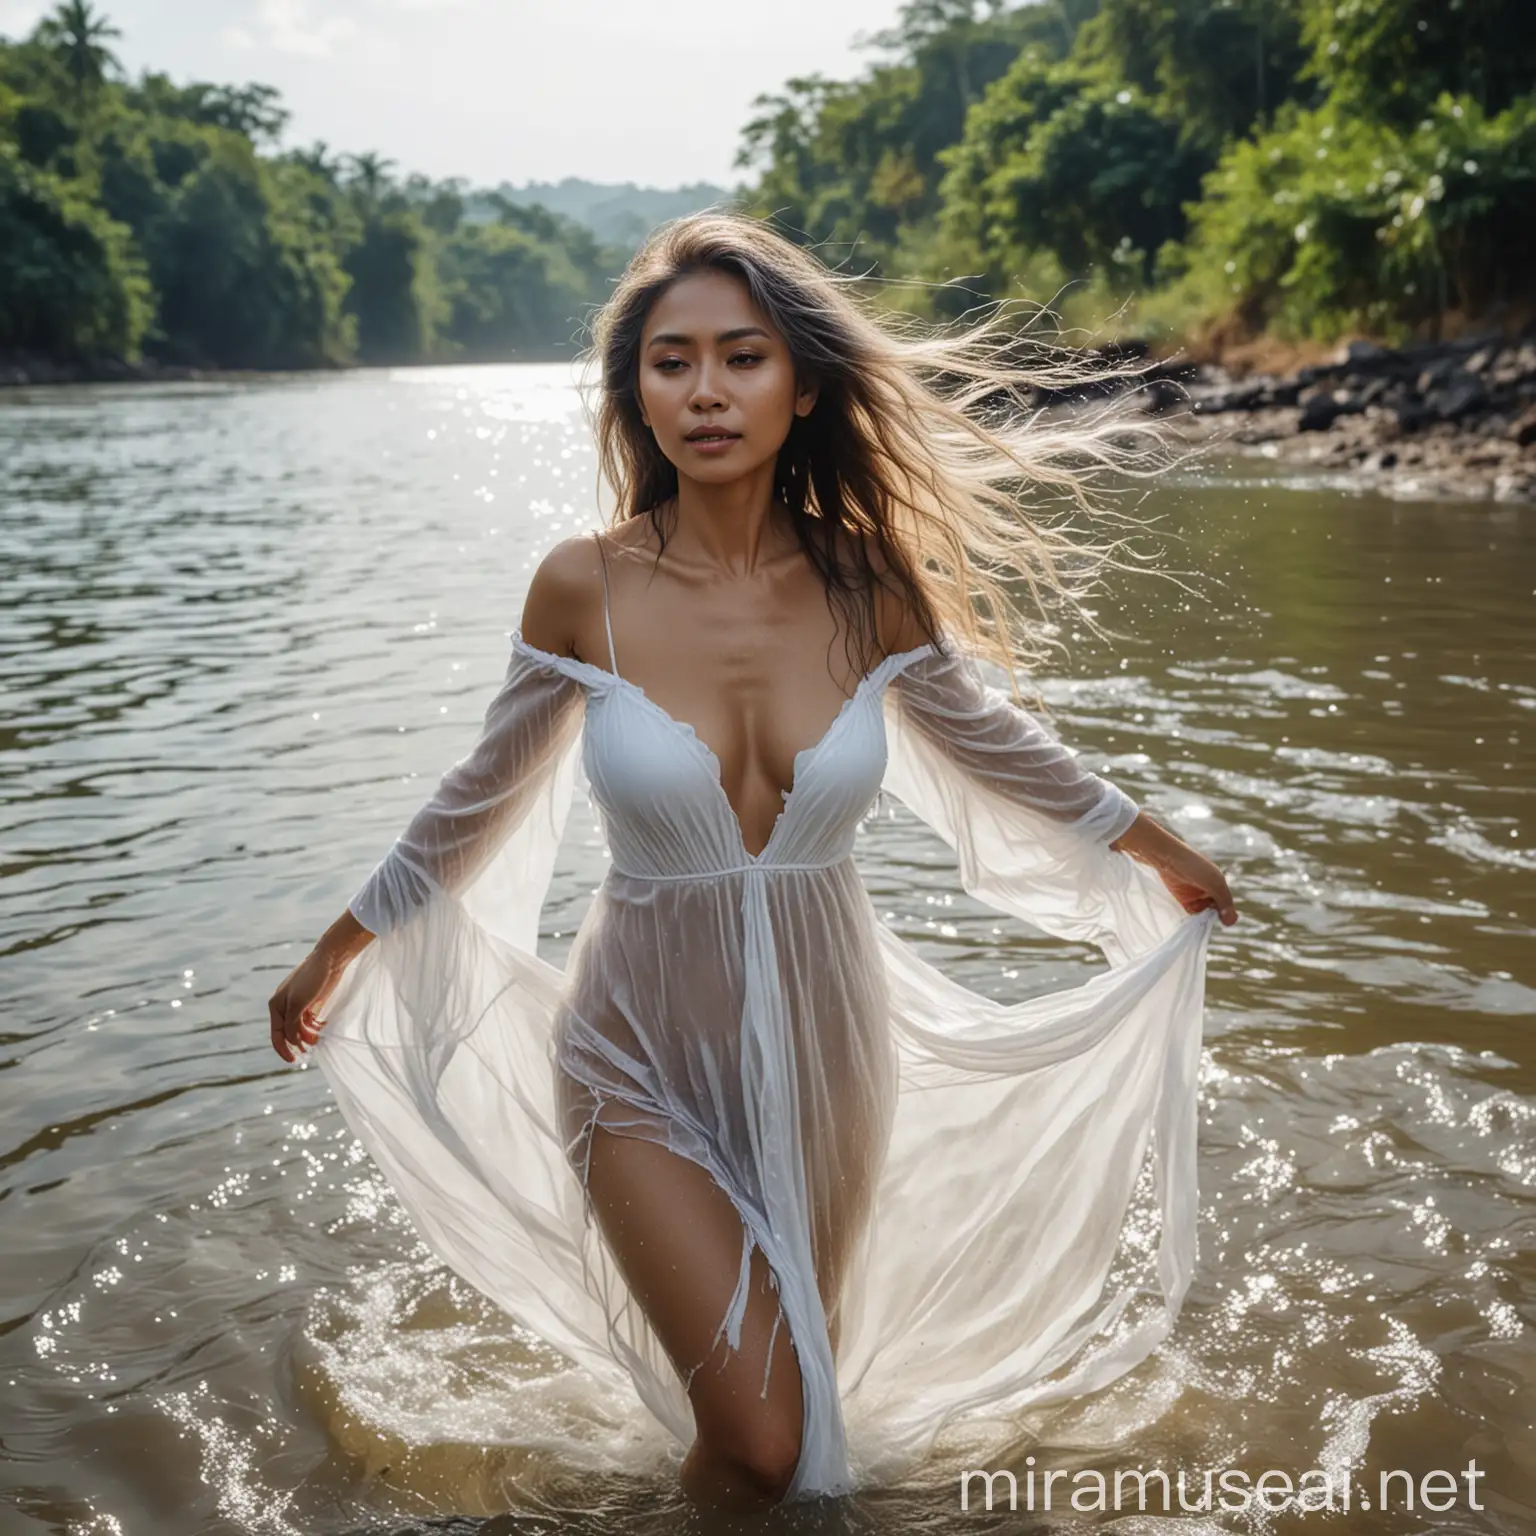 photo very clear sharp real full hd 8 k
an Indonesian woman in her 50s beautiful sexy long hair flowing down her body wearing a thin transparent white dress wet hair bathing by the river 
realistic photo natural colors 